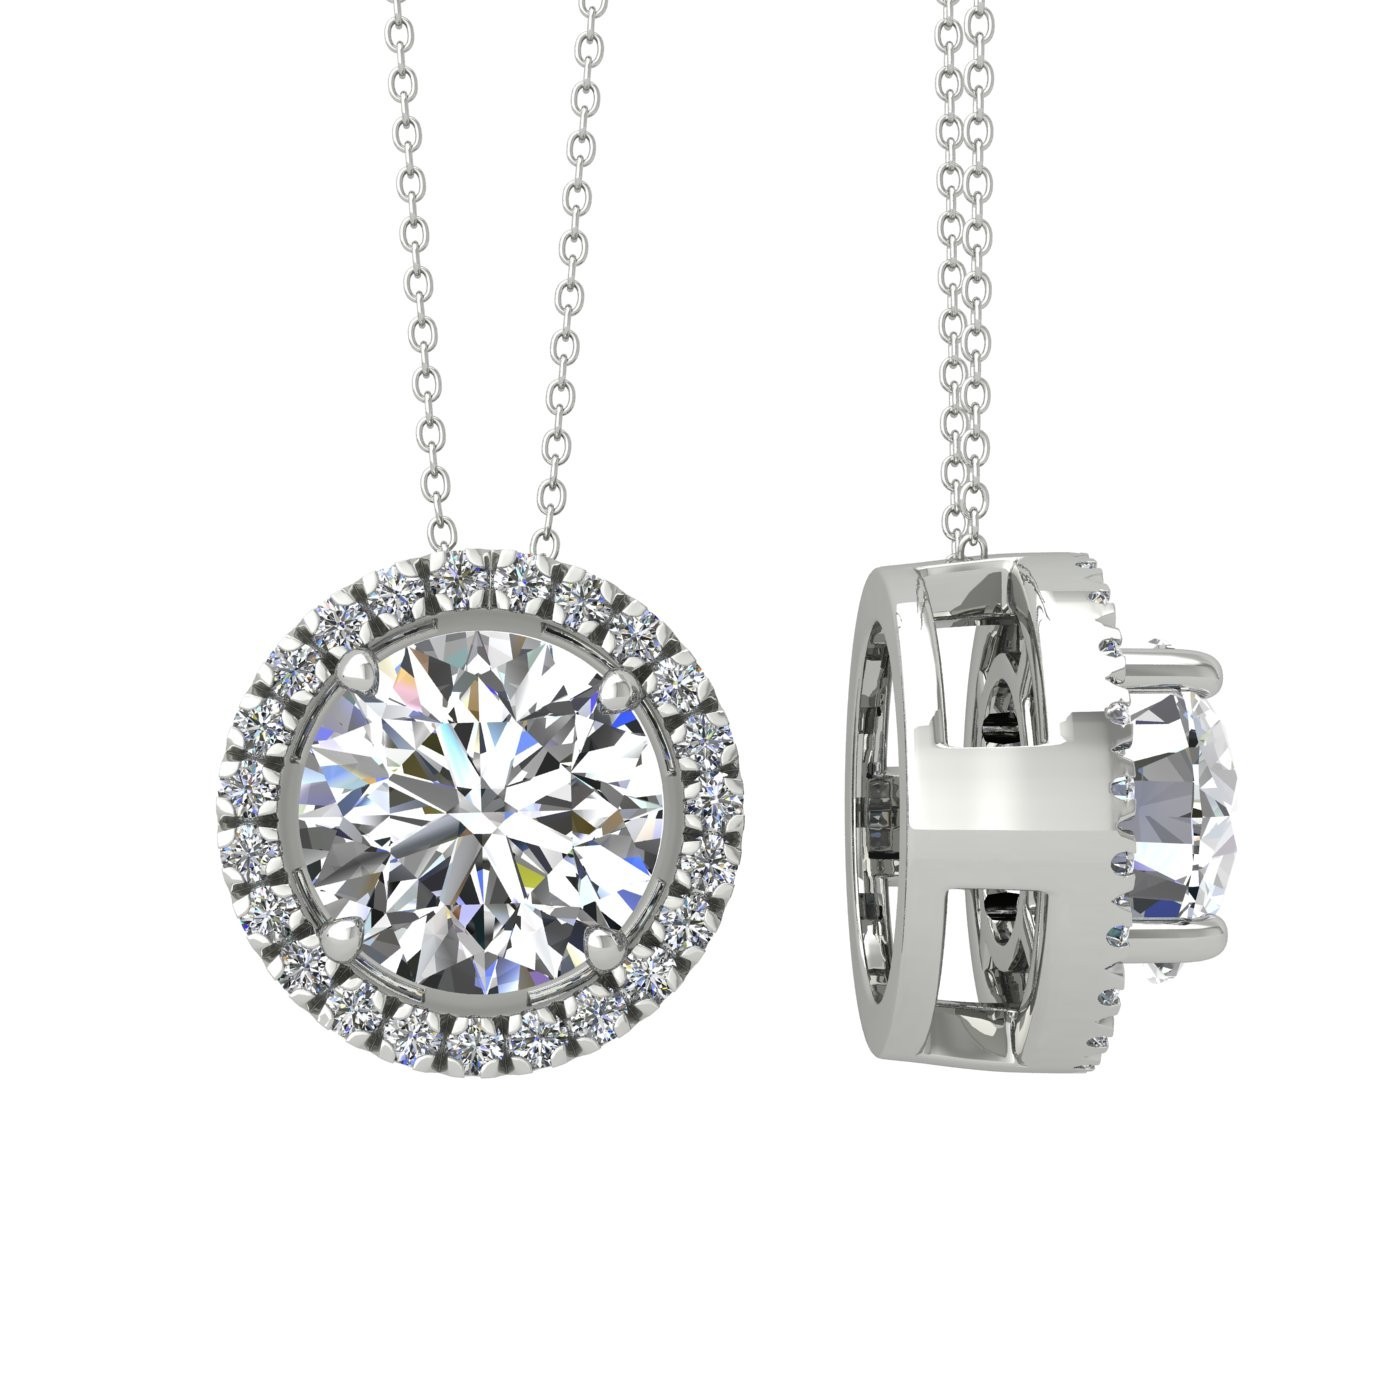 18k white gold 1 ct 4 prong round shape diamond pendant with diamond pavÉ set halo including chain seperate from the pendant